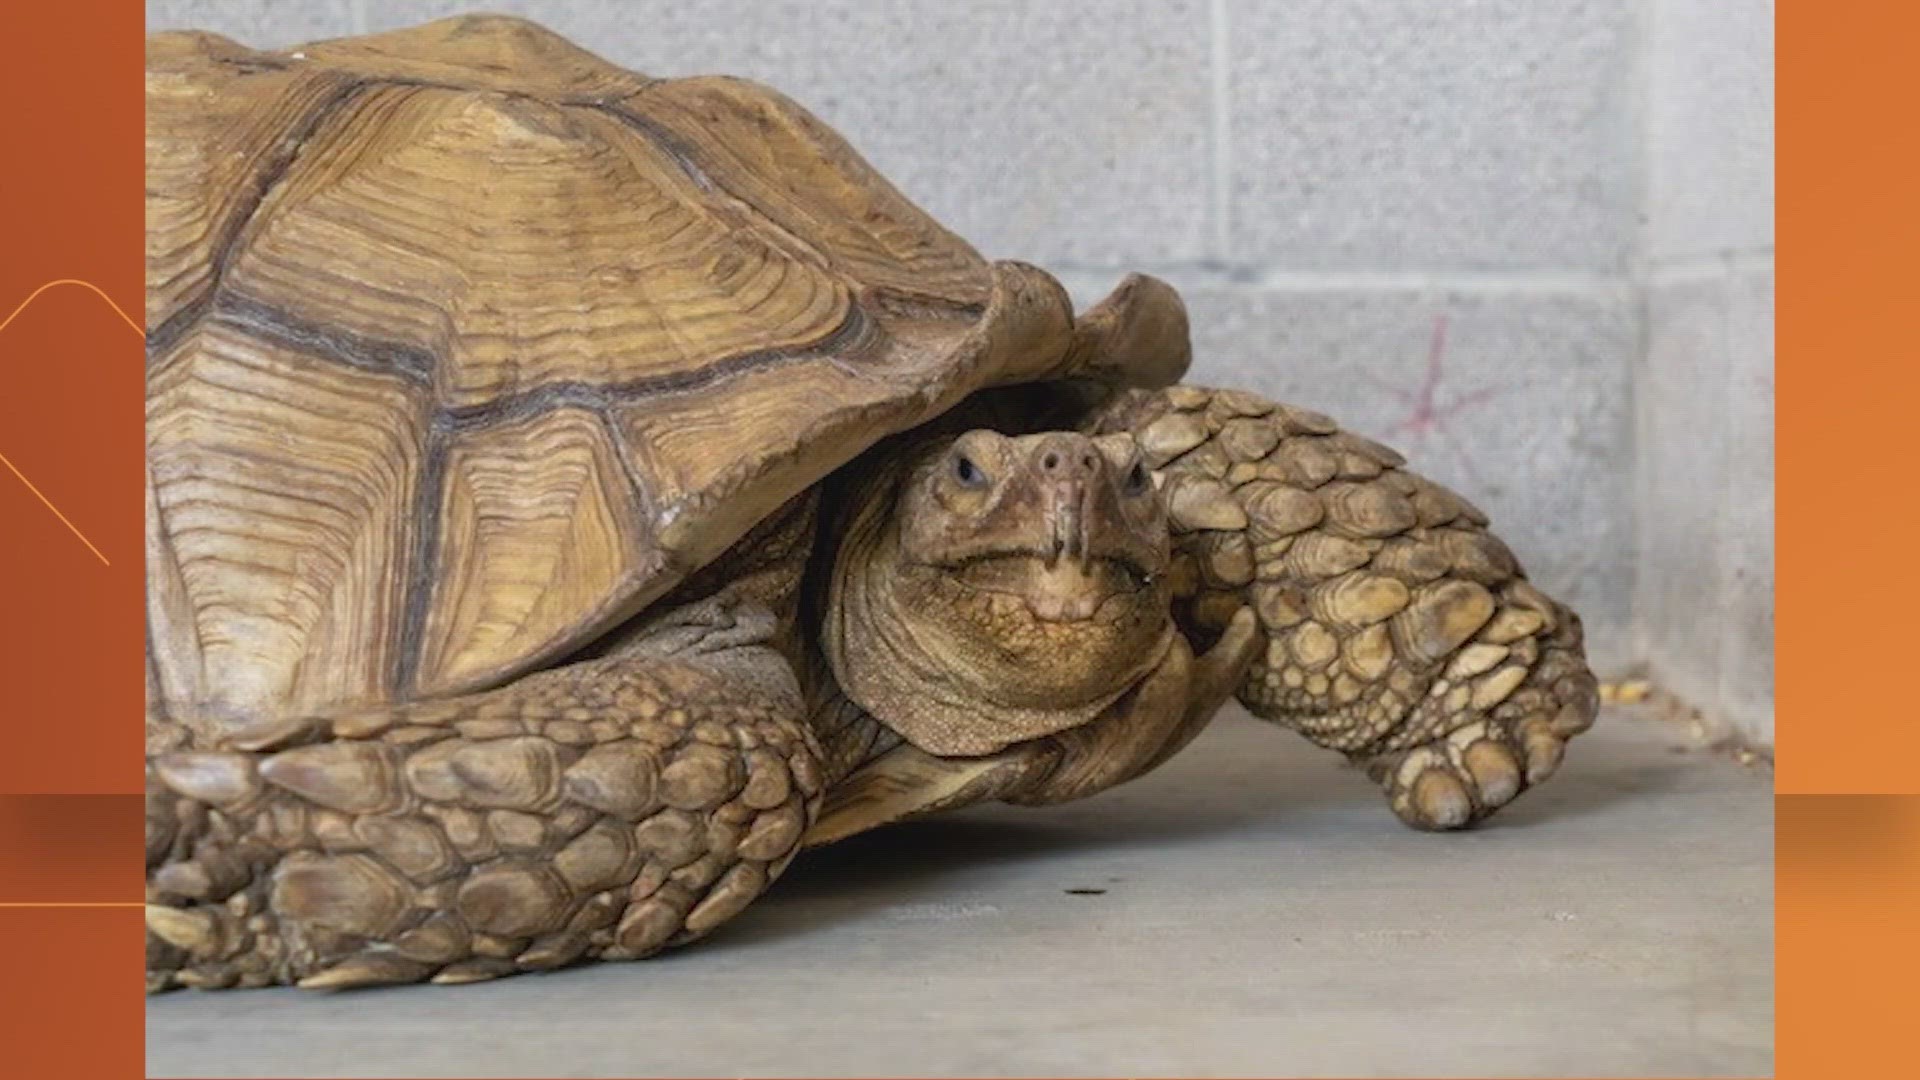 The animal center is looking to return the tortoise to its owner.